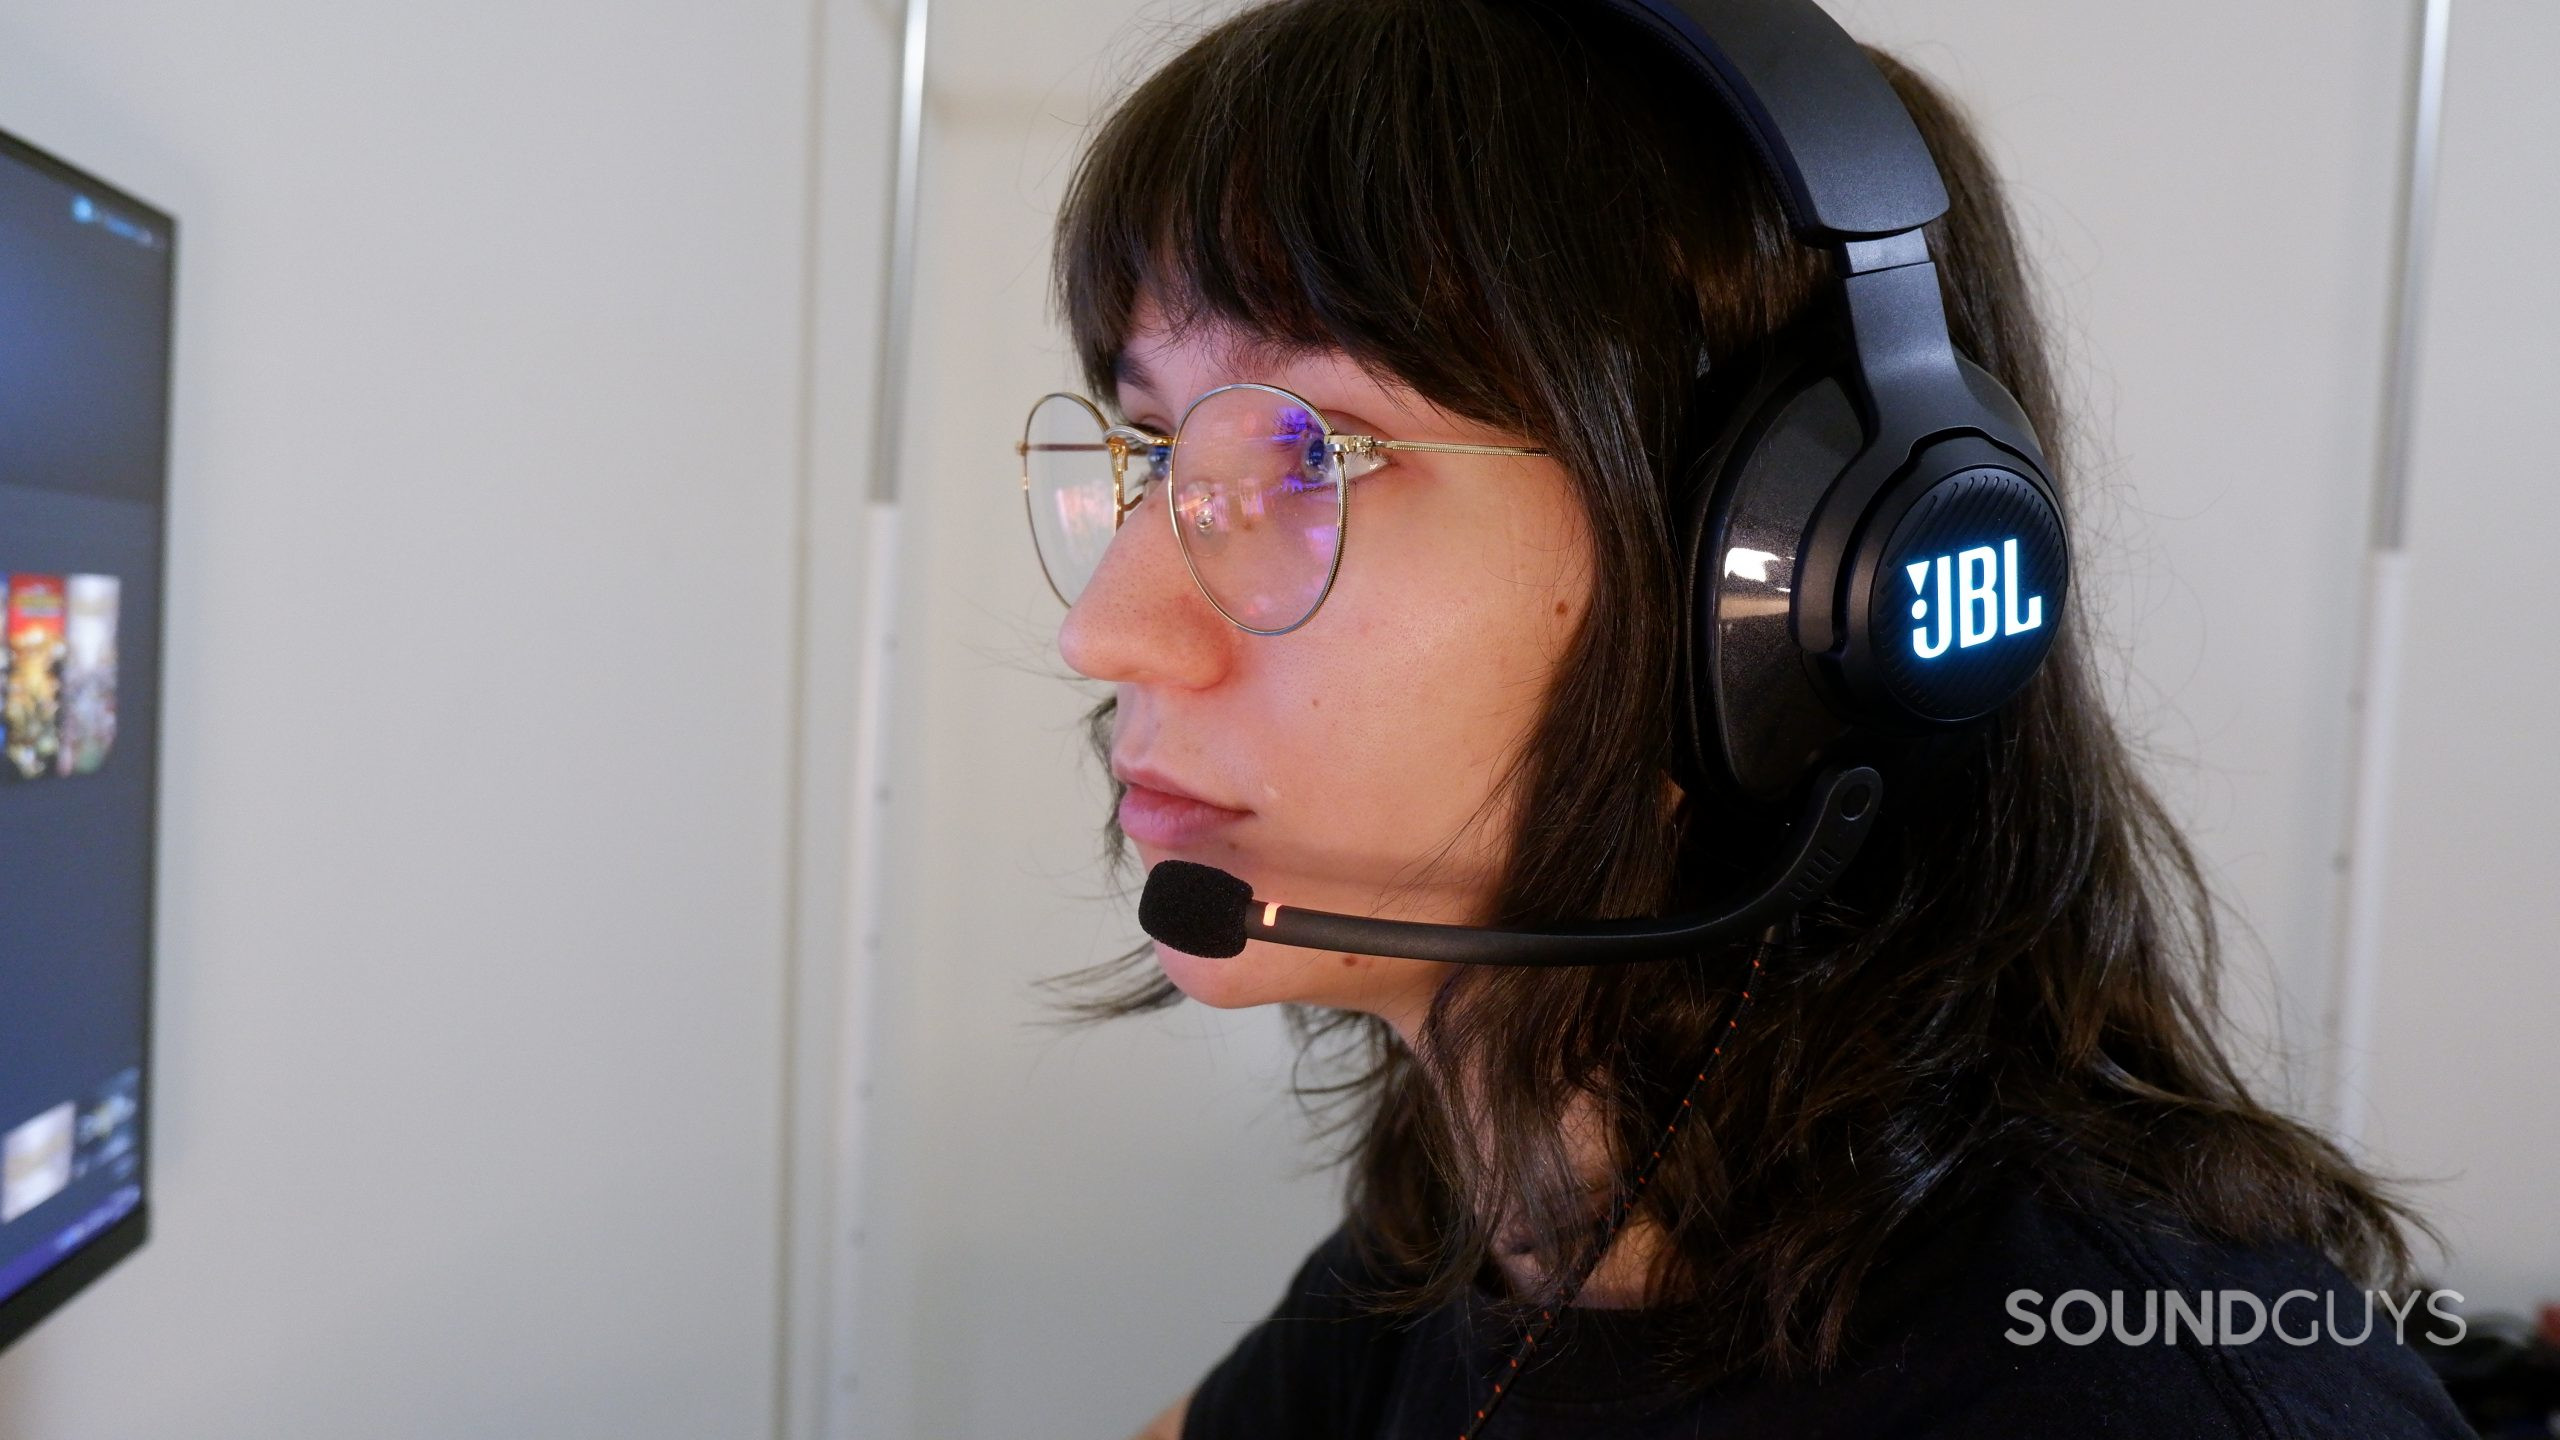 The JBL Quantum 400 headset on a person looking at a computer screen.